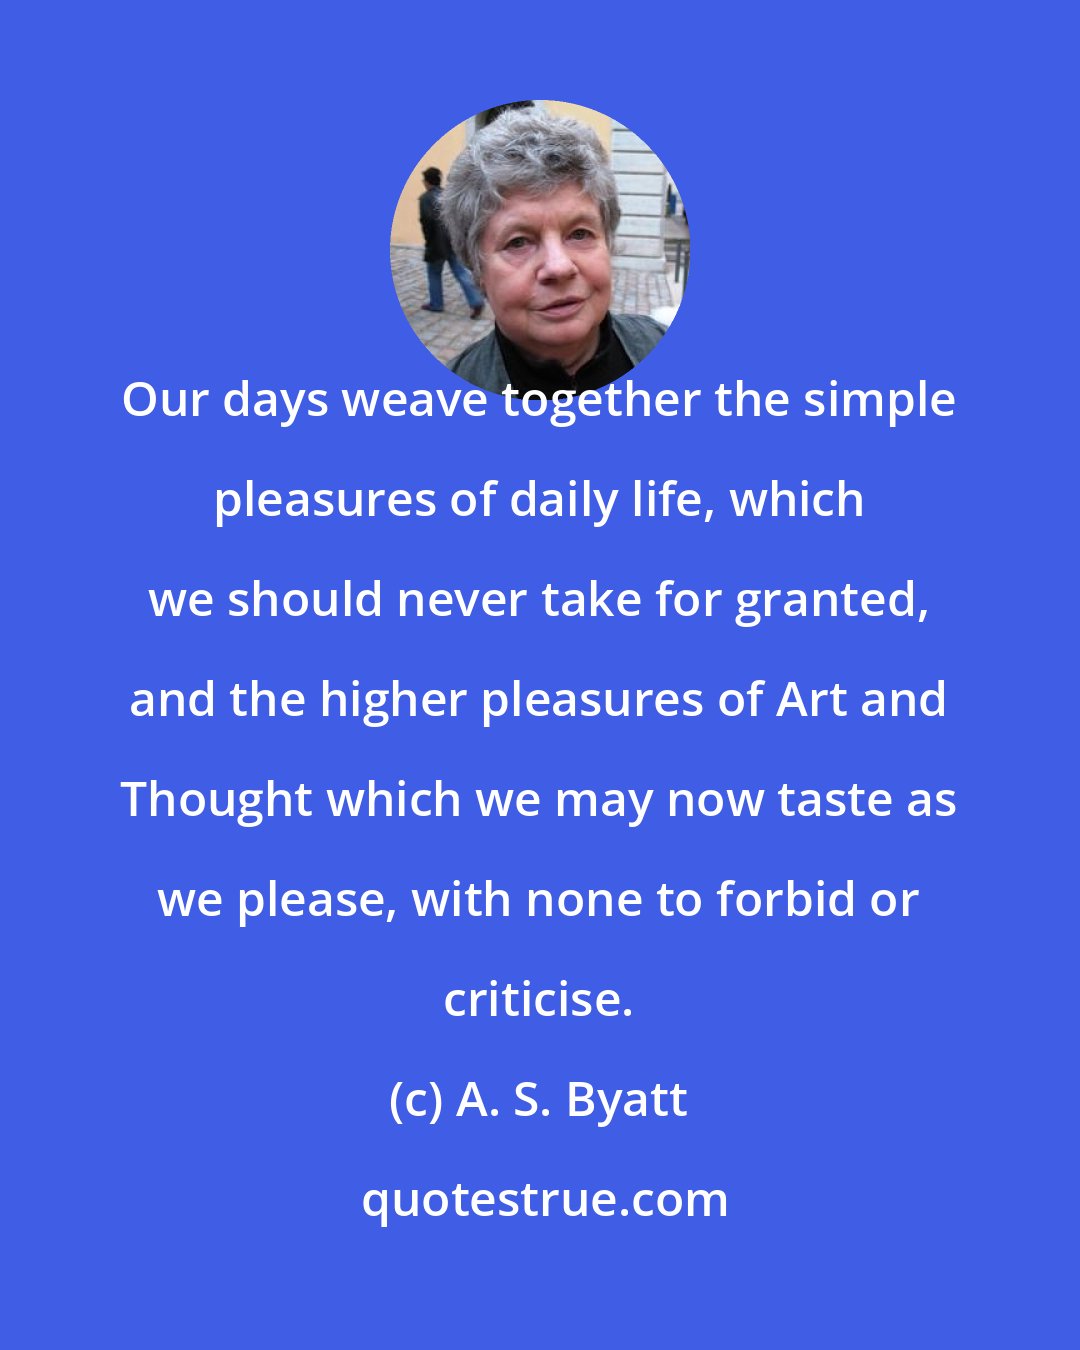 A. S. Byatt: Our days weave together the simple pleasures of daily life, which we should never take for granted, and the higher pleasures of Art and Thought which we may now taste as we please, with none to forbid or criticise.